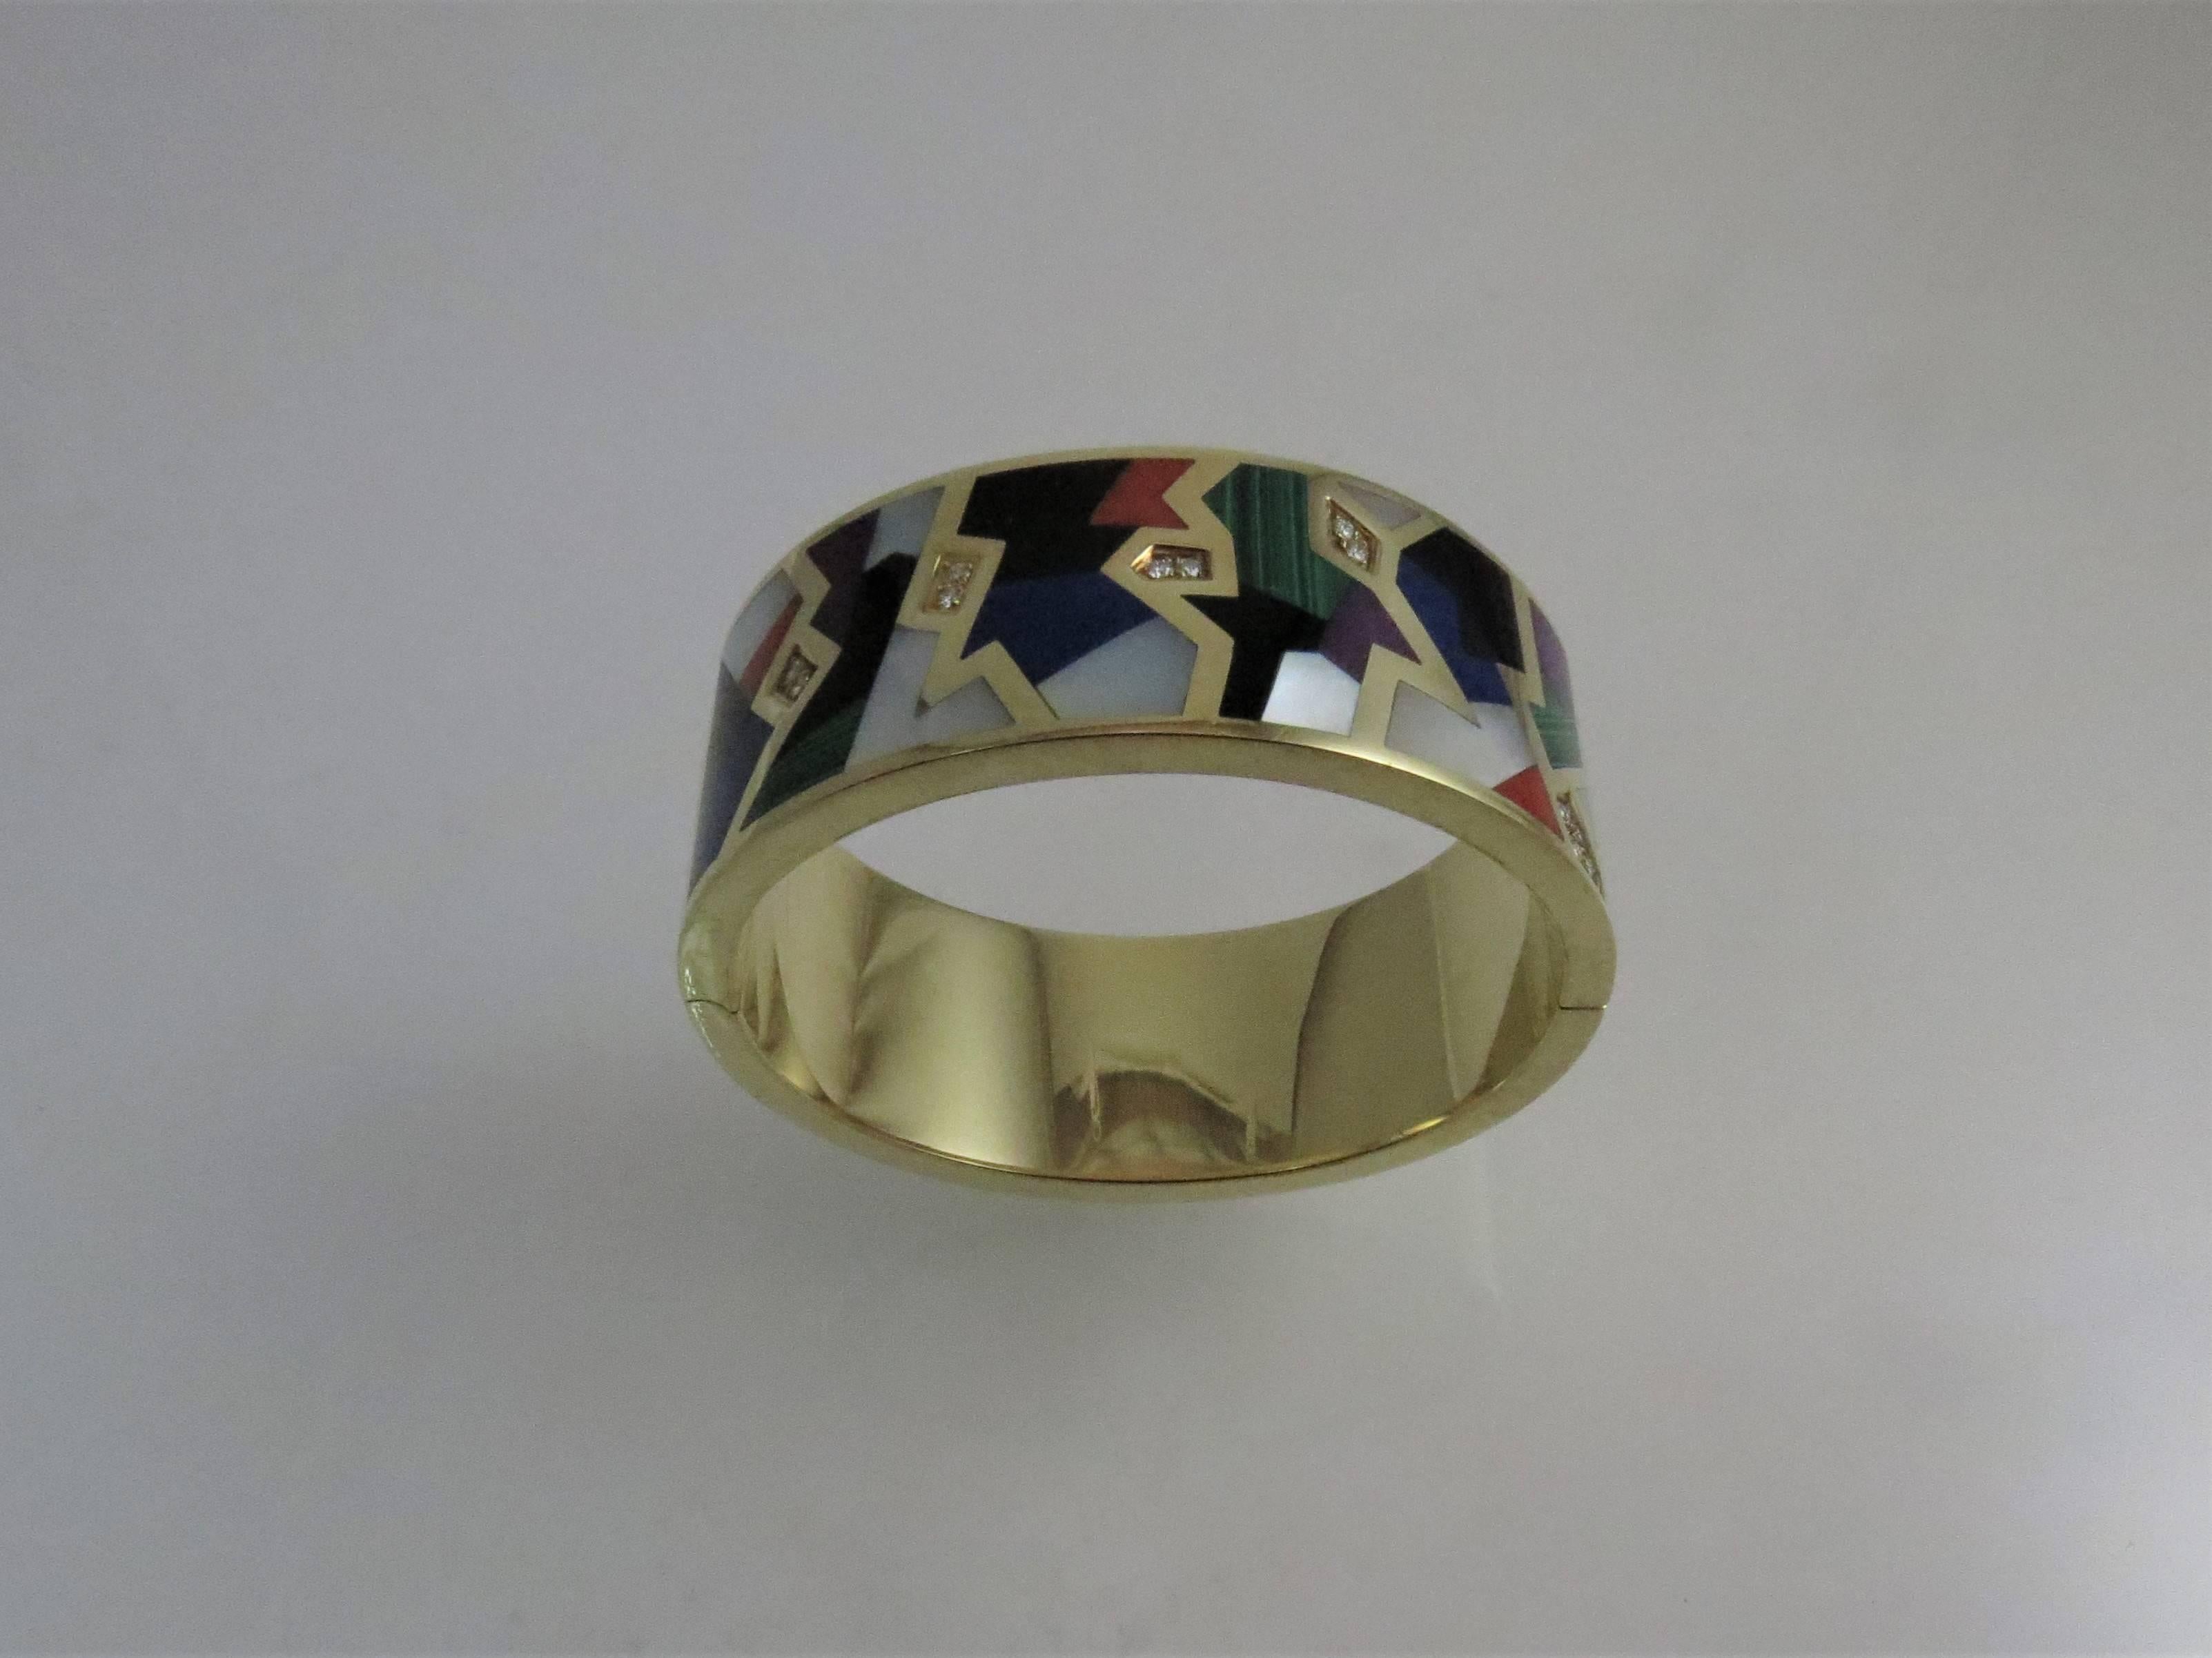 14K yellow gold, Asch Grossbardt bangle bracelet with hinge, inlaid with black onyx, mother of pearl, lapis, coral, malachite, sugilite and 12 full cut round diamonds weighing .24cts, G-H color, VS clarity
Last retail: 10,500